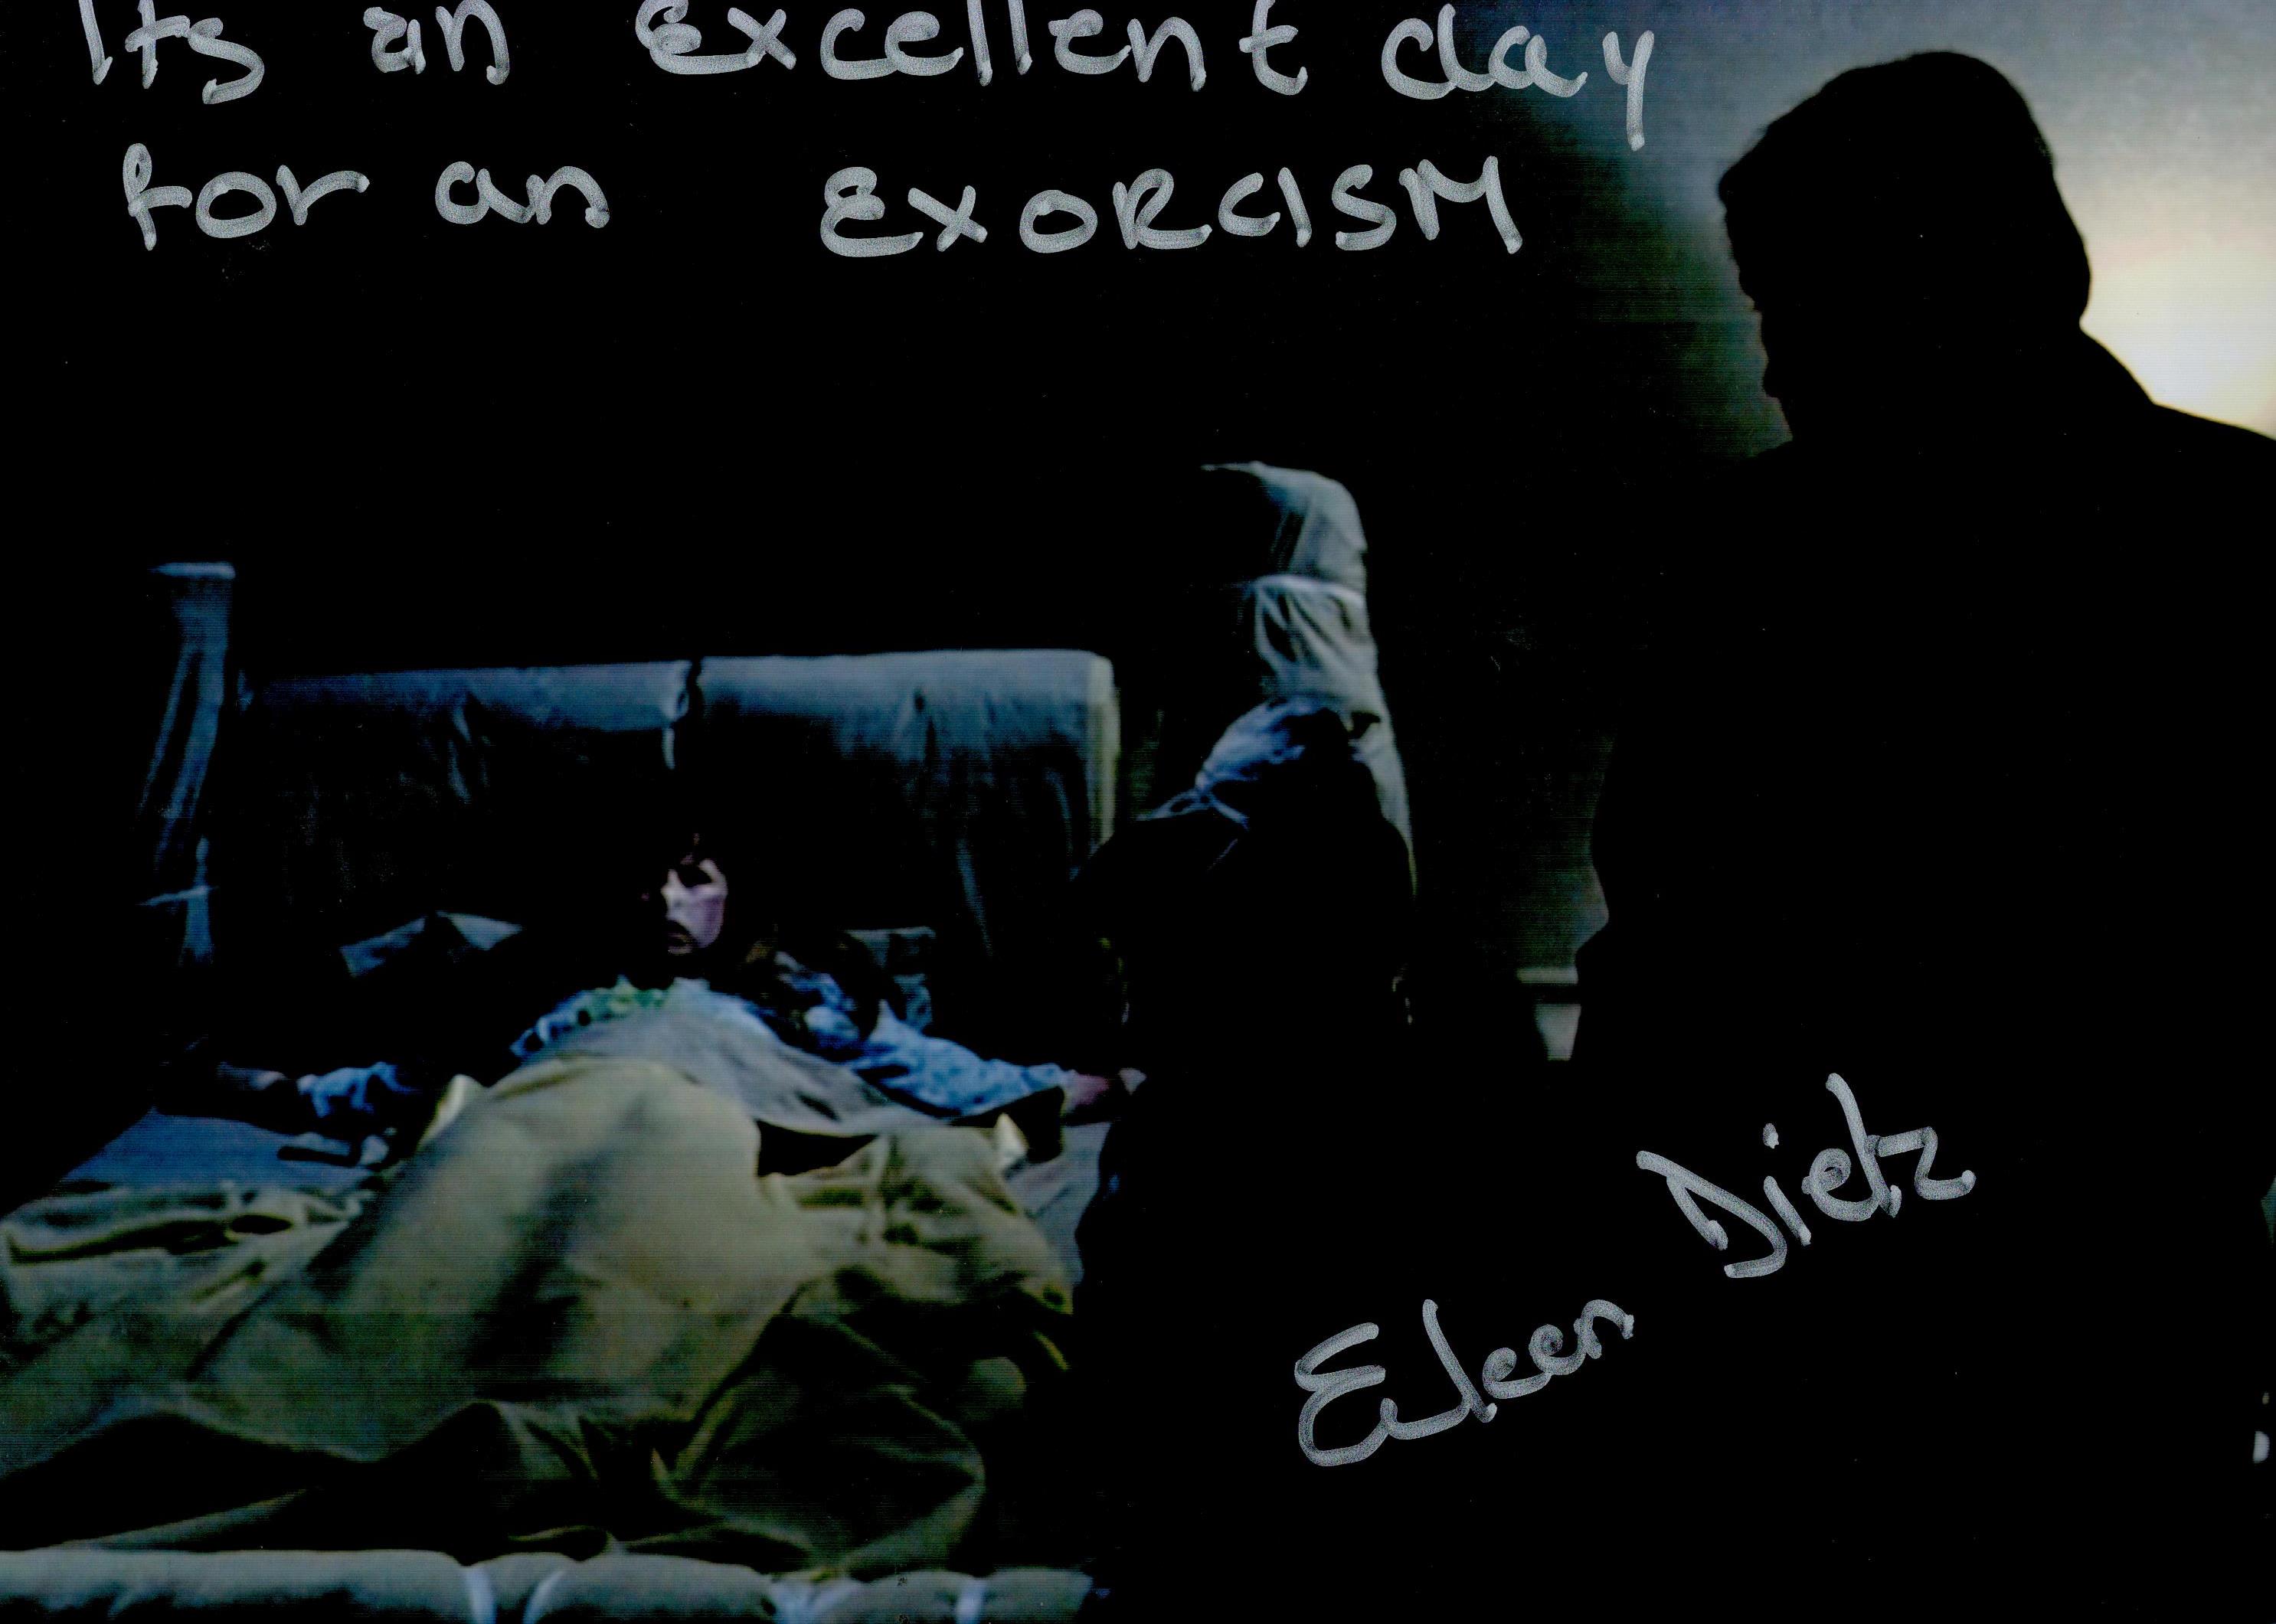 Horror Actor Eileen Diets Signed and Inscribed 10x8 inch Colour Photo. Inscribed with Its an